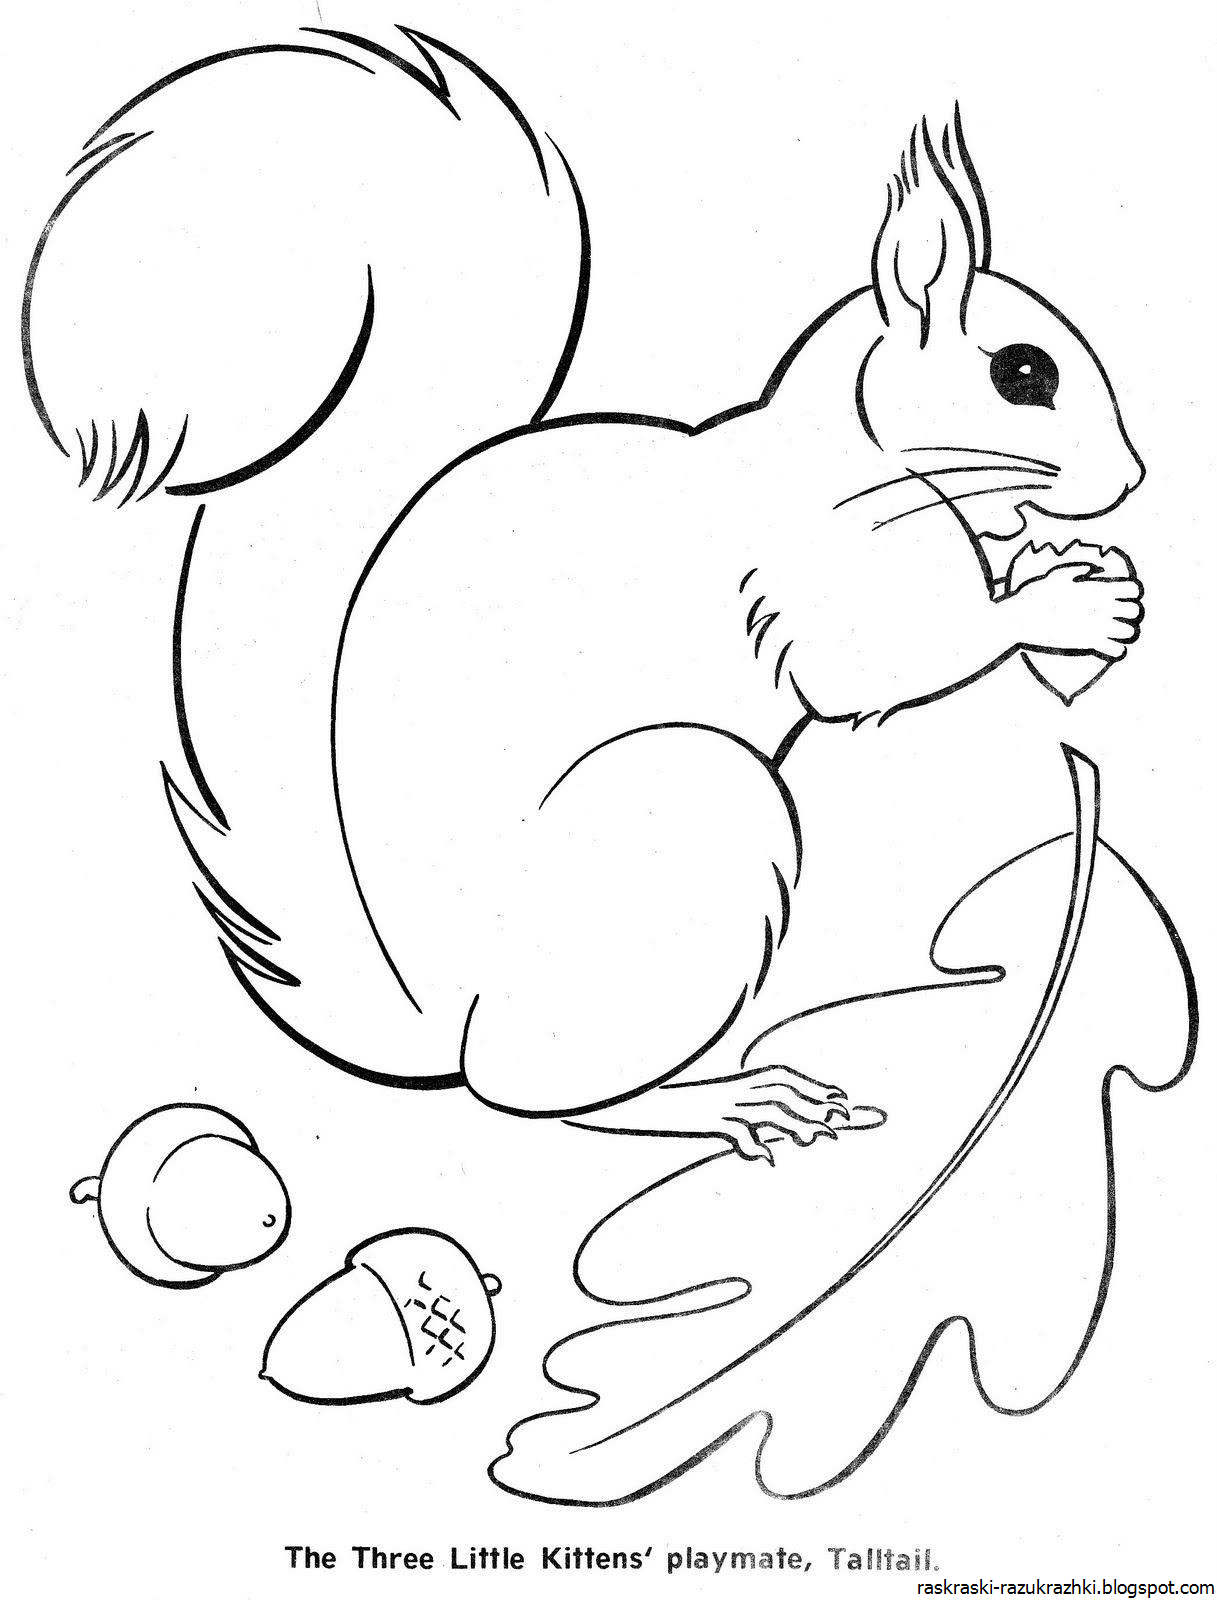 Squirrel nuts playful coloring book for kids